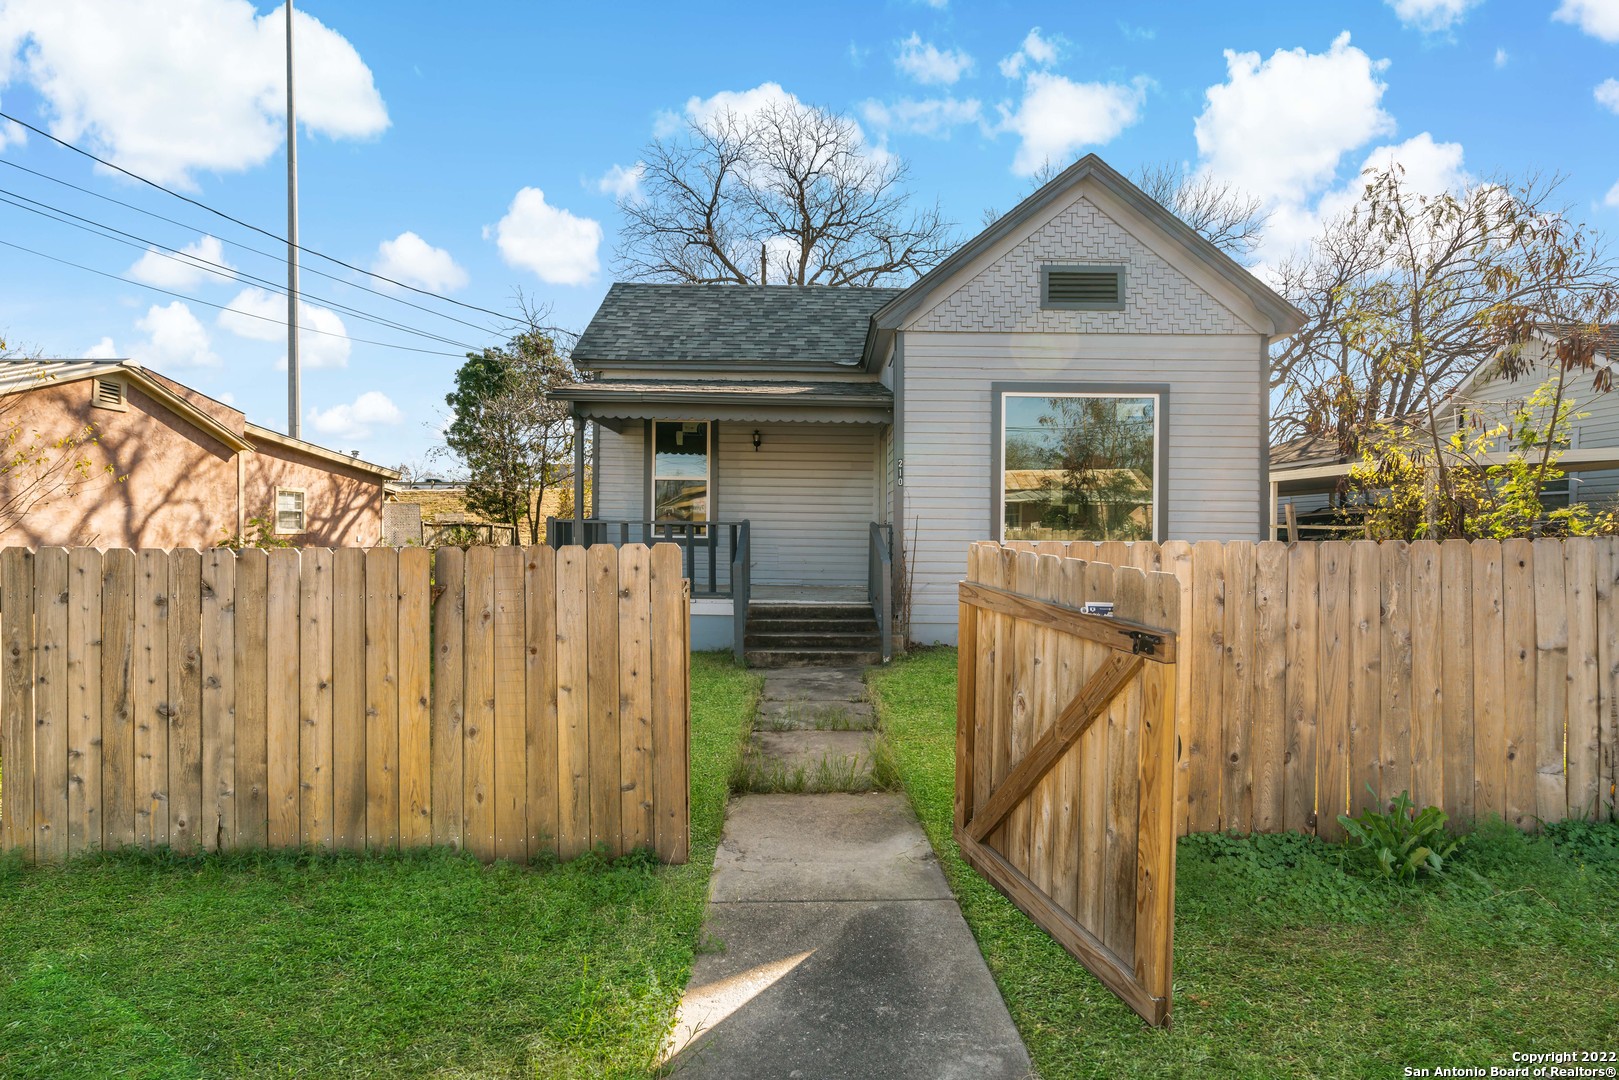 Located 10 mins from the Pearl! Plug the address in the GPS and come take a look at this San Antonio gem. Spacious backyard and front yard for those big families or pet lovers. Fenced in for your peace of mind. Has the potential to be a perfect Airbnb!